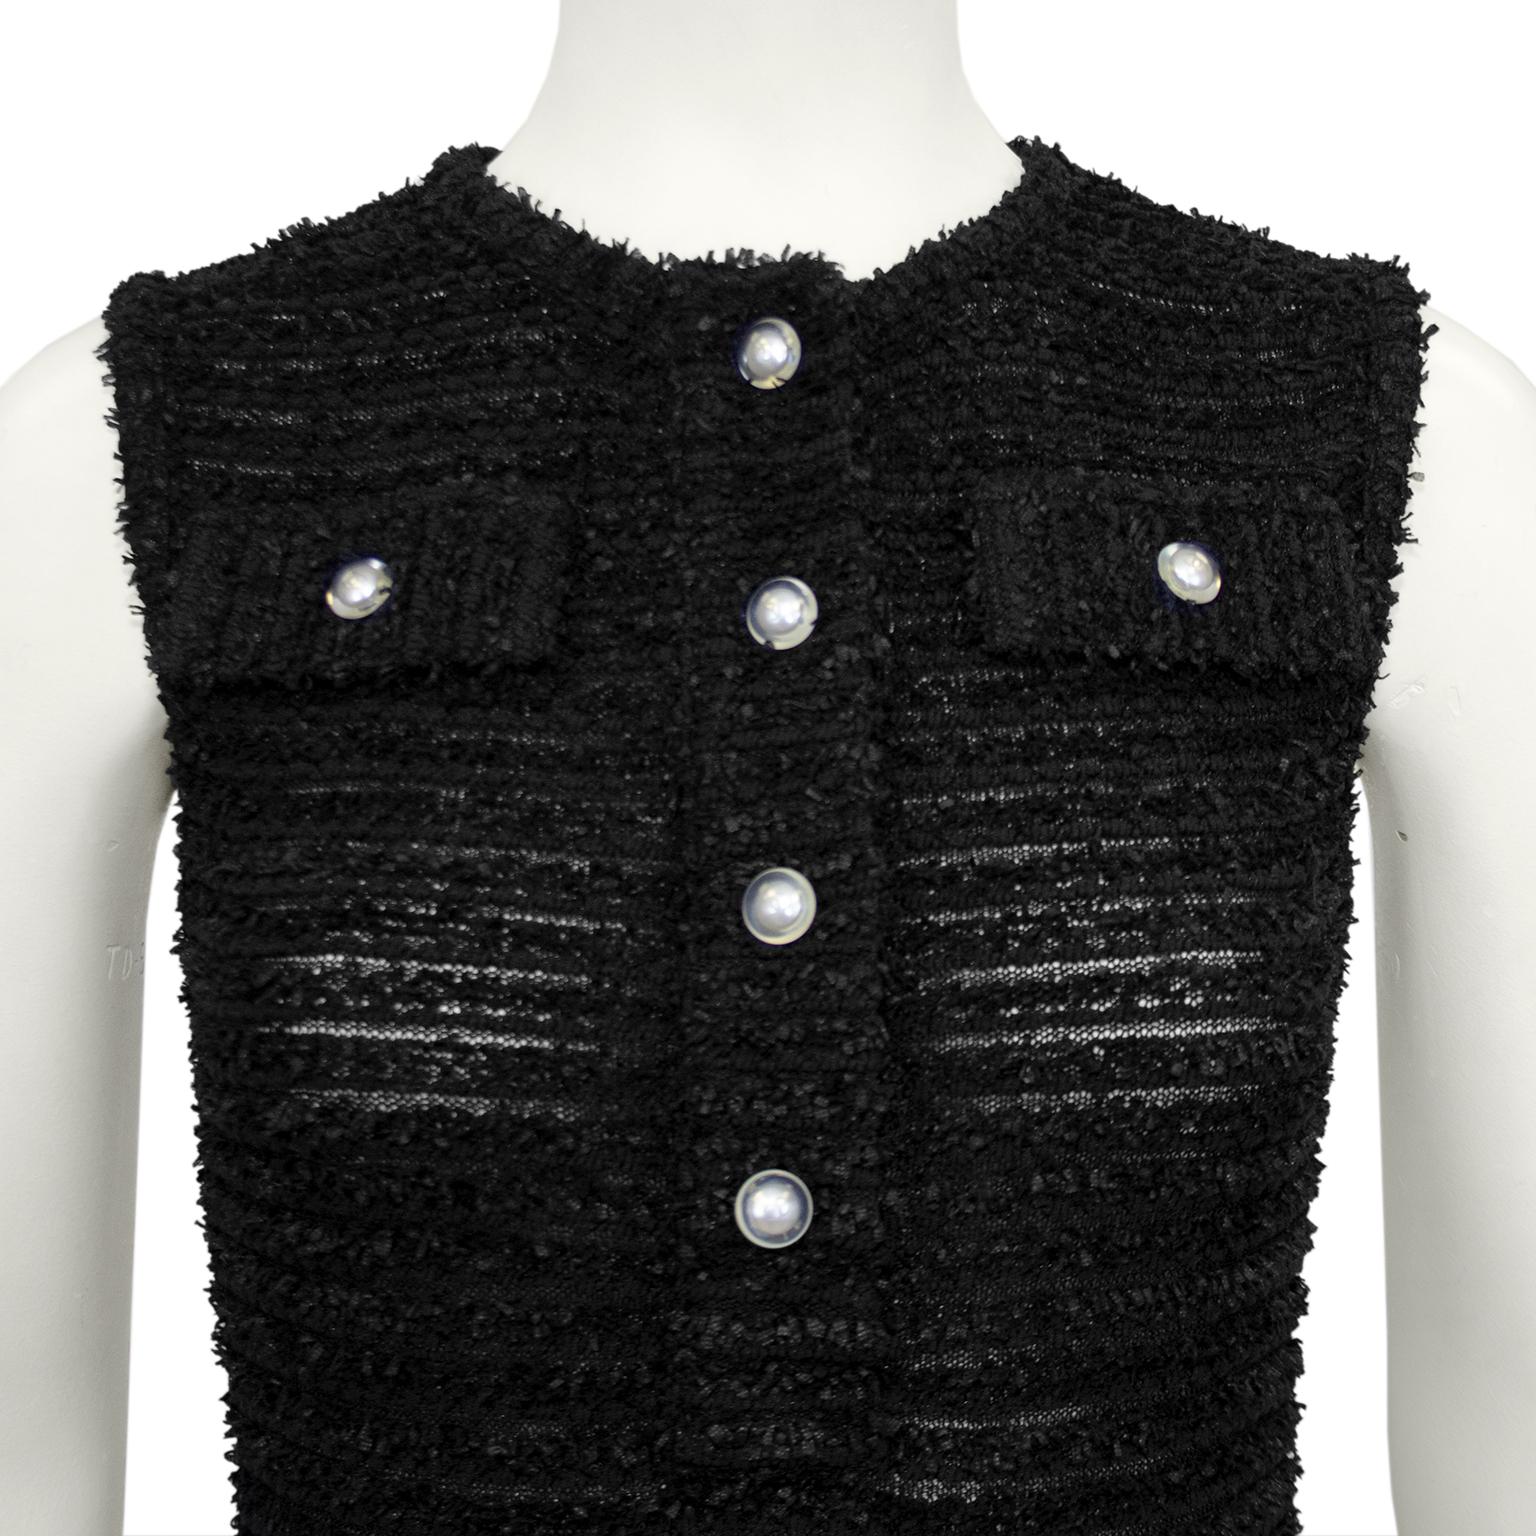 Mid 2000s Chanel Black Boucle Sheer Dress  In Good Condition For Sale In Toronto, Ontario